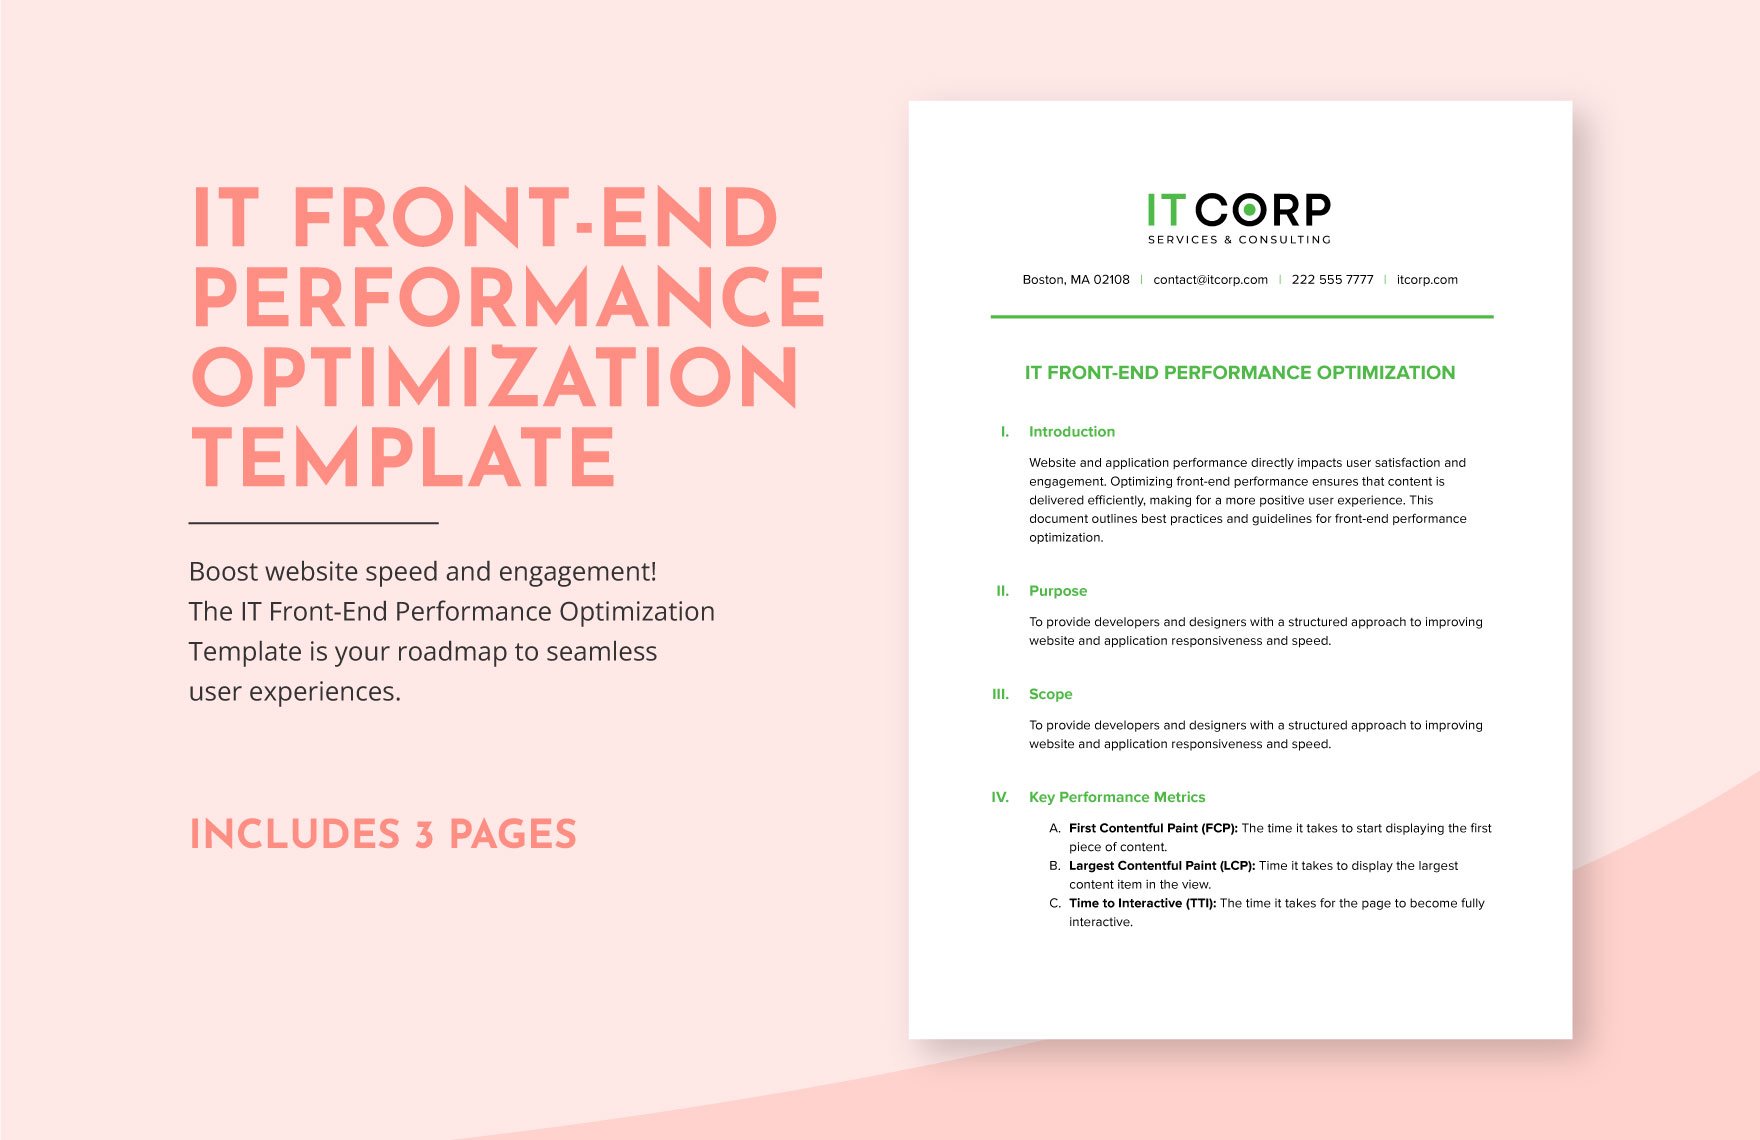 IT Front-End Performance Optimization Template